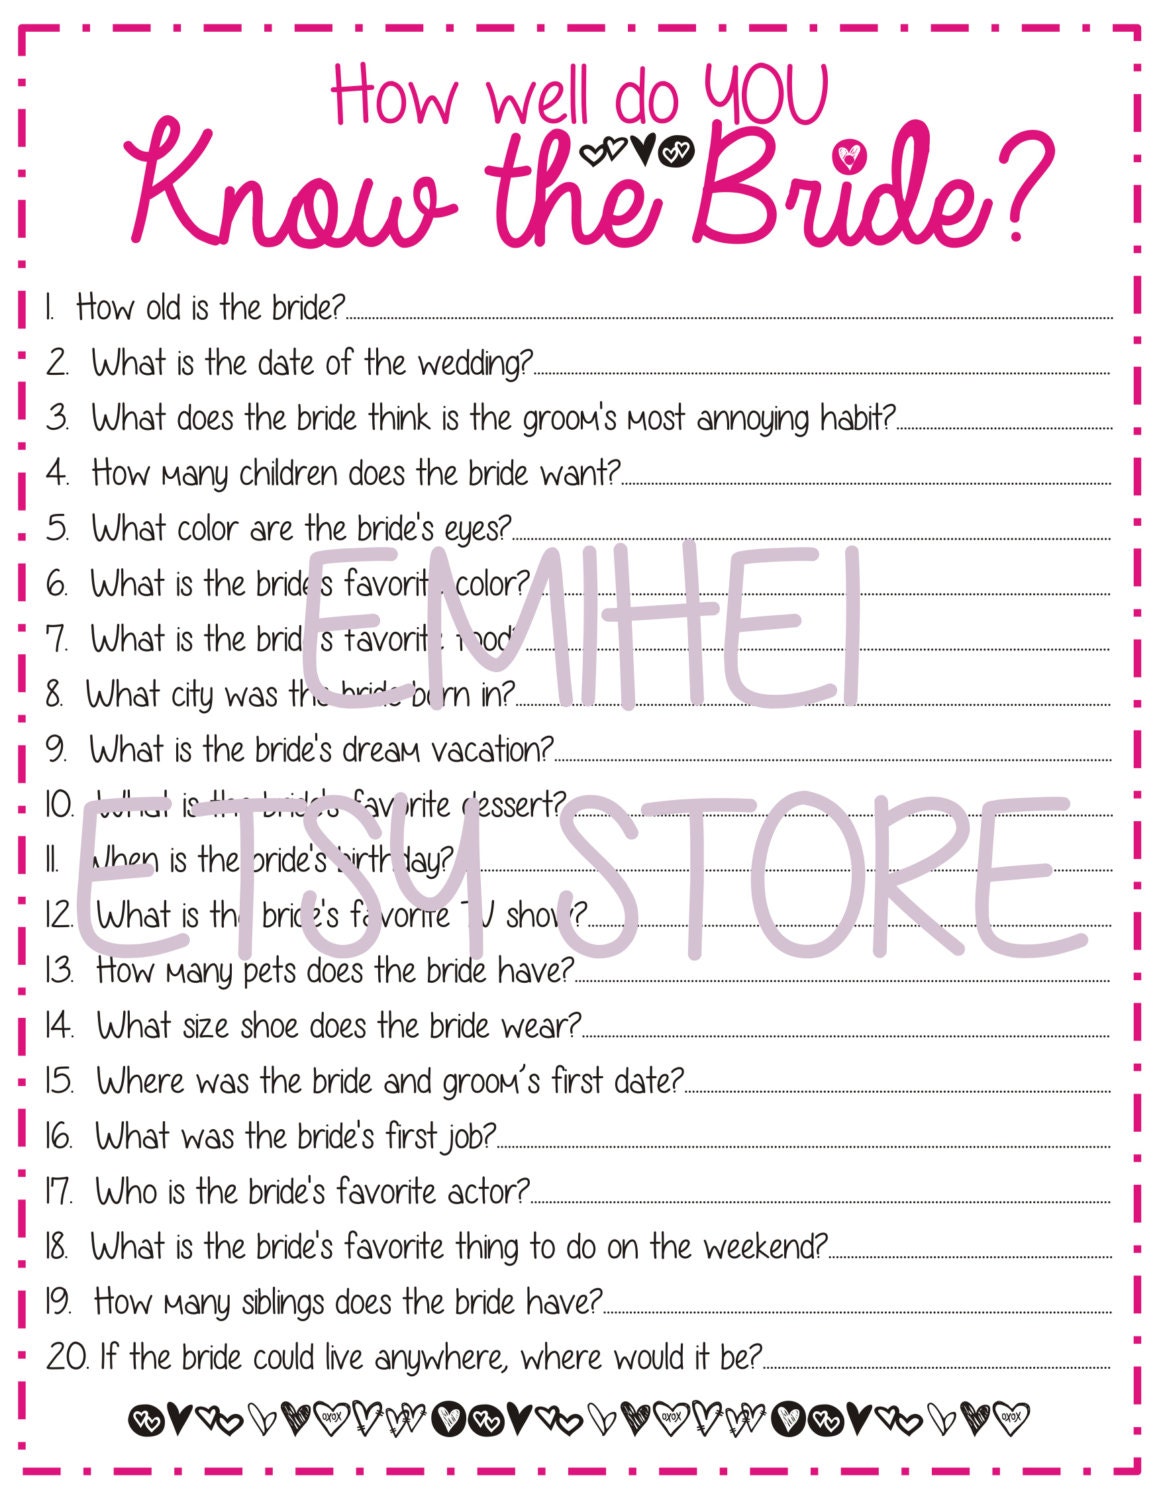 How Well Do You Know the Bride Bridal by BridalShowerBoutique